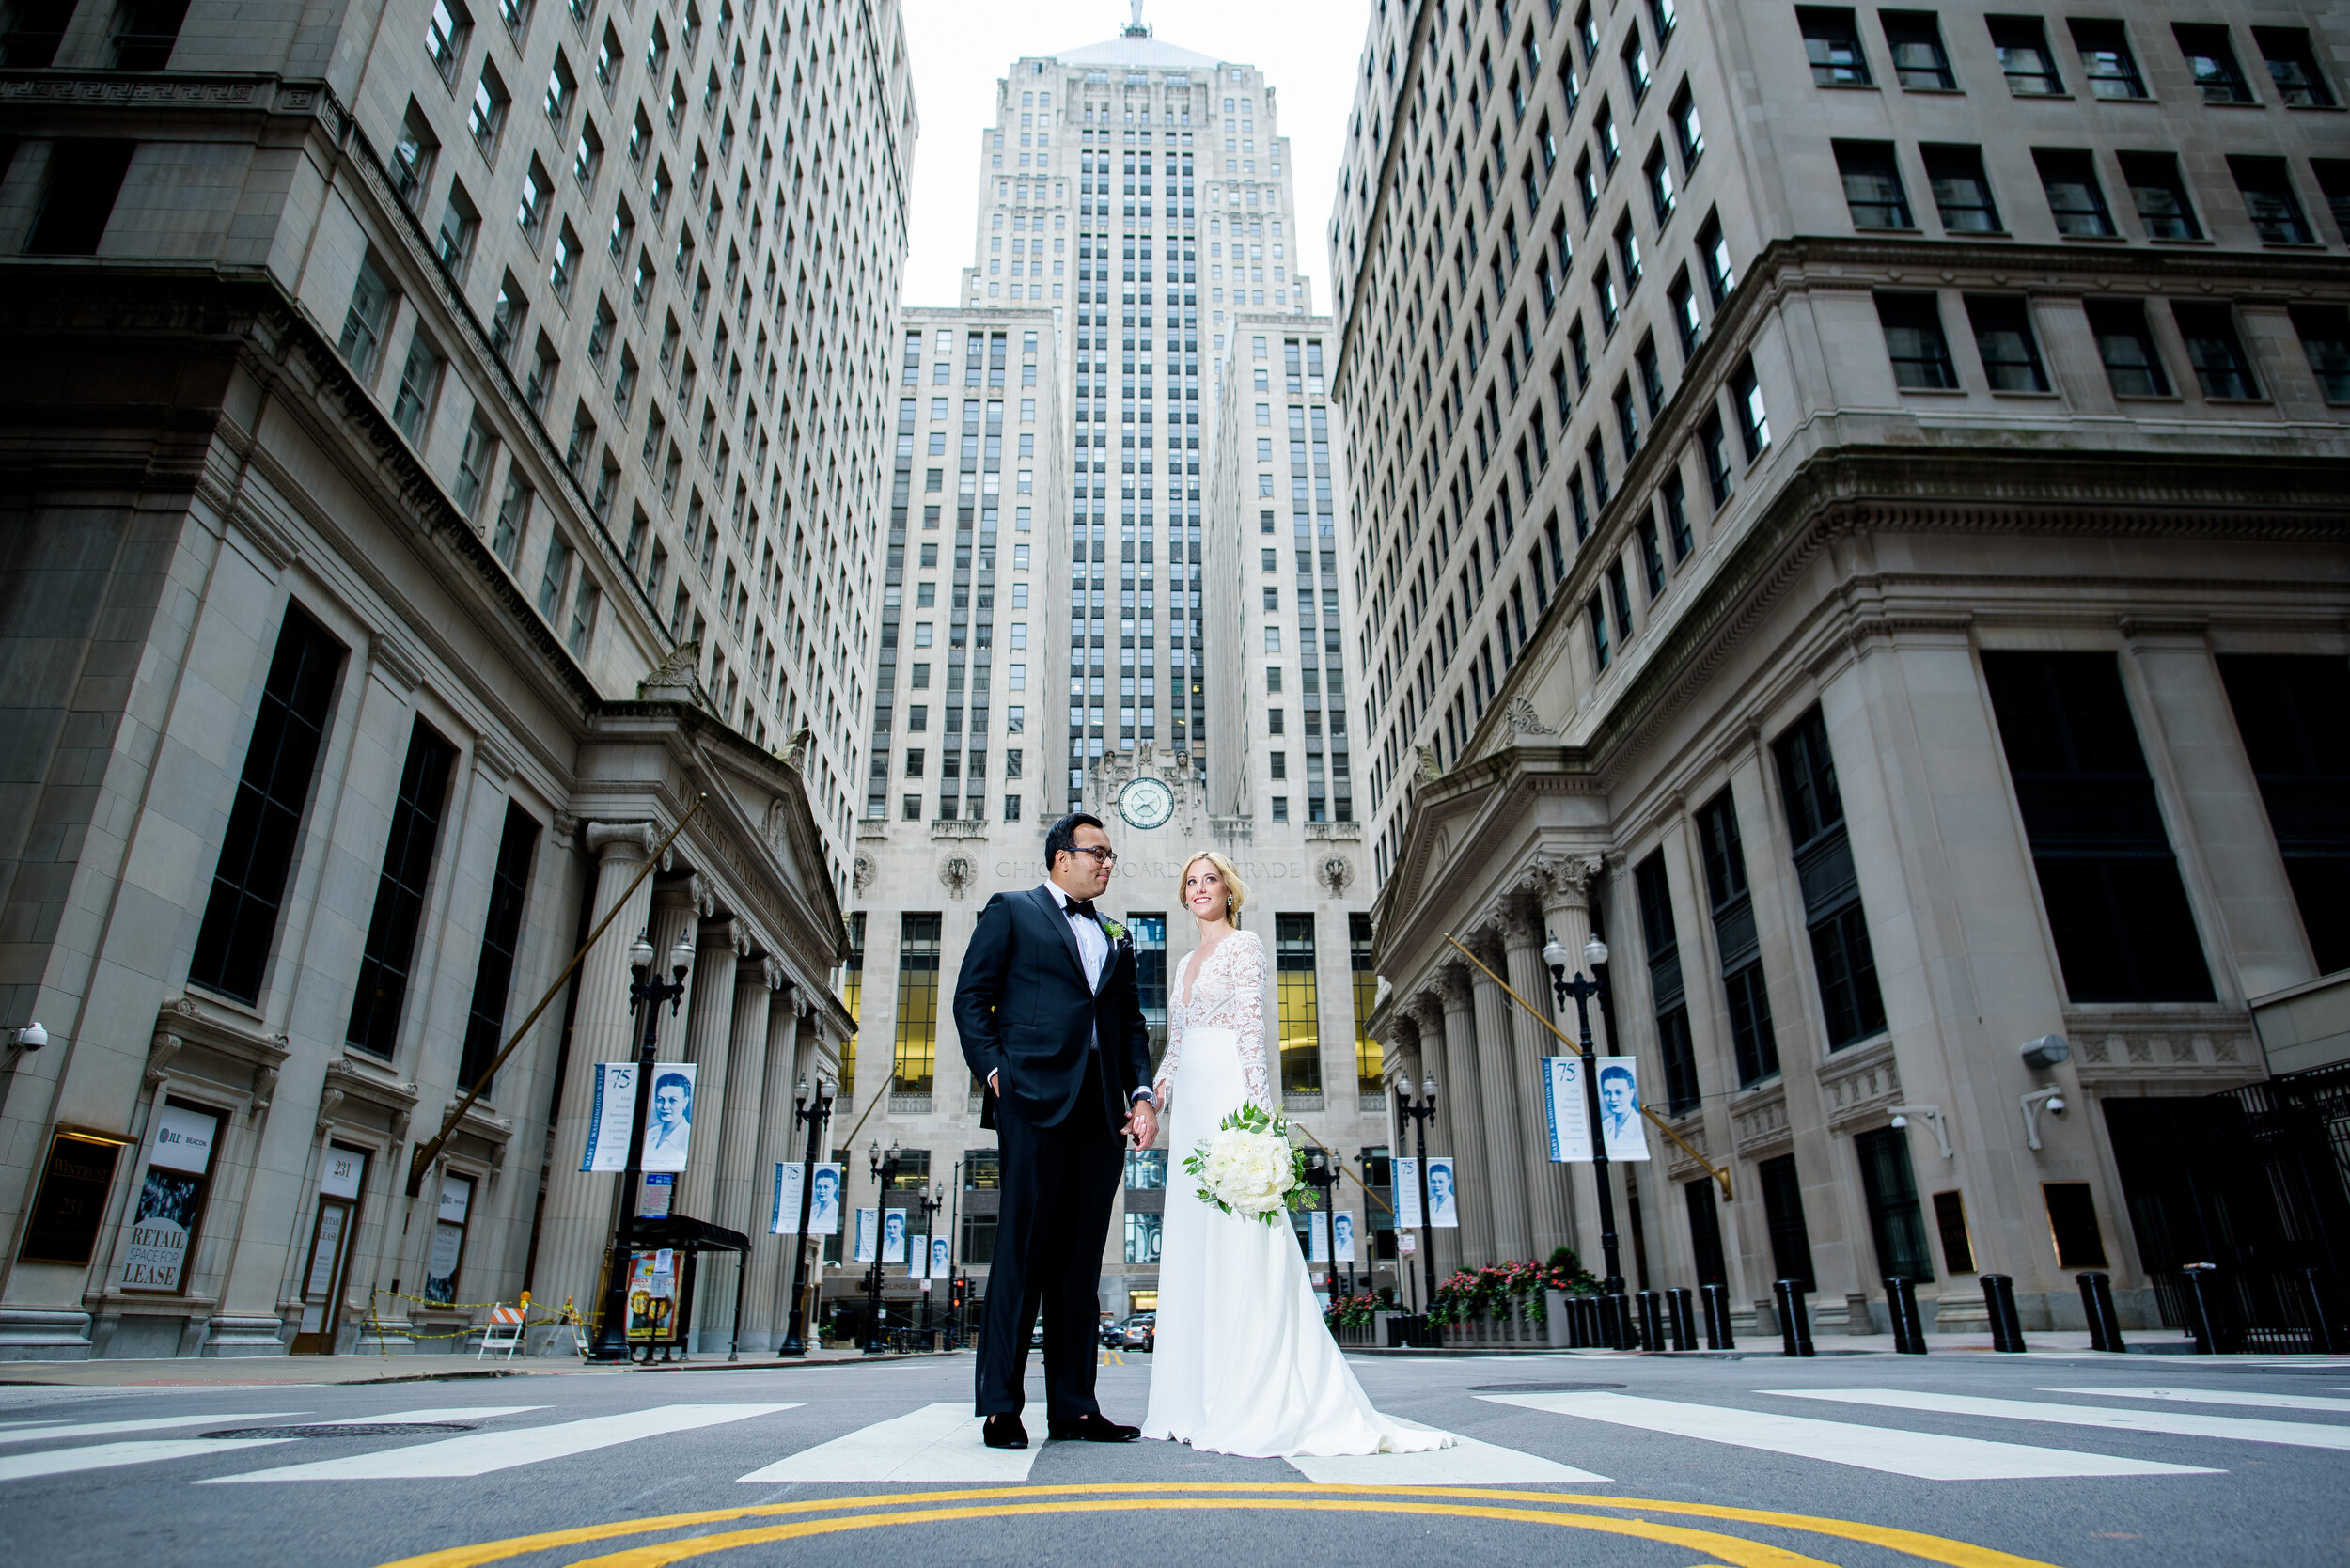 Bride and groom portrait outside the Board of Trade: Geraghty Chicago wedding photography captured by J. Brown Photography.